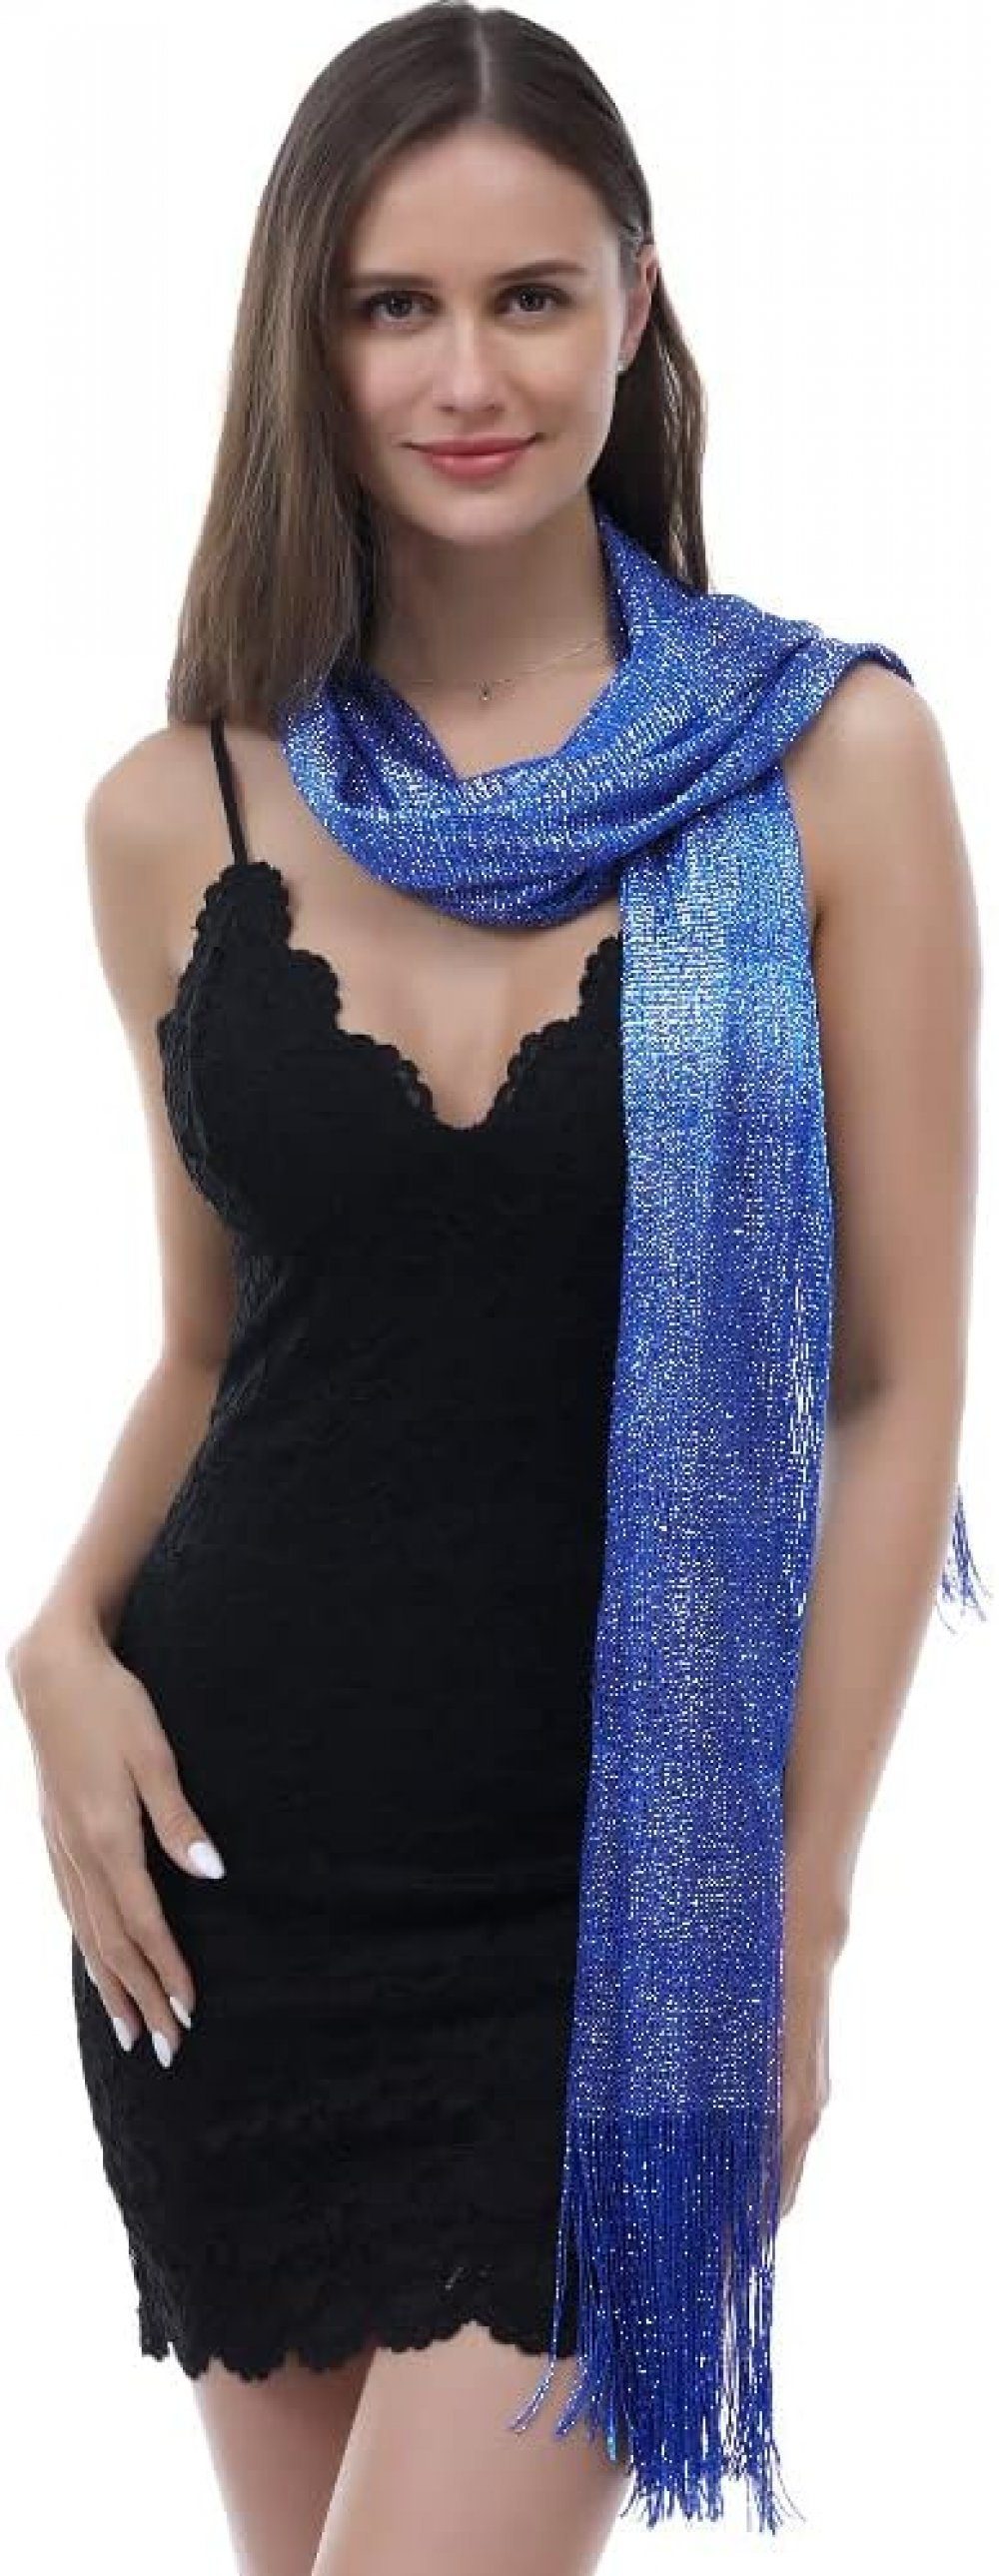 shawl BlauSilber Schal evening sparkling buckle for metal Holiday parties suitable WaKuKa